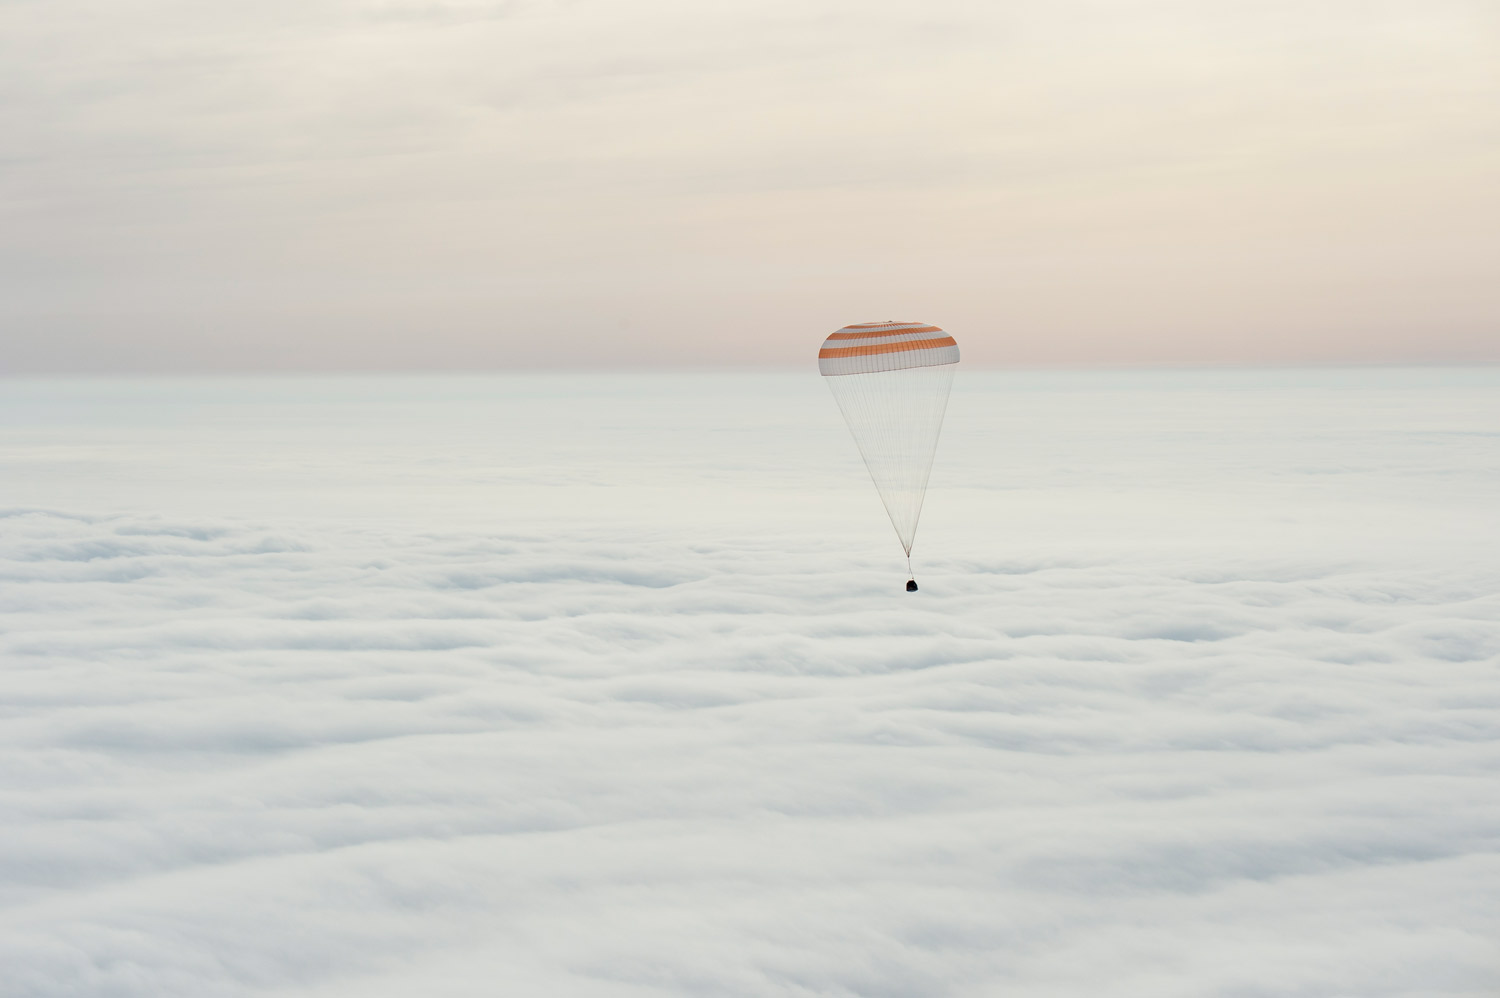 One Year Crew Returns to Earth | Credit: NASA